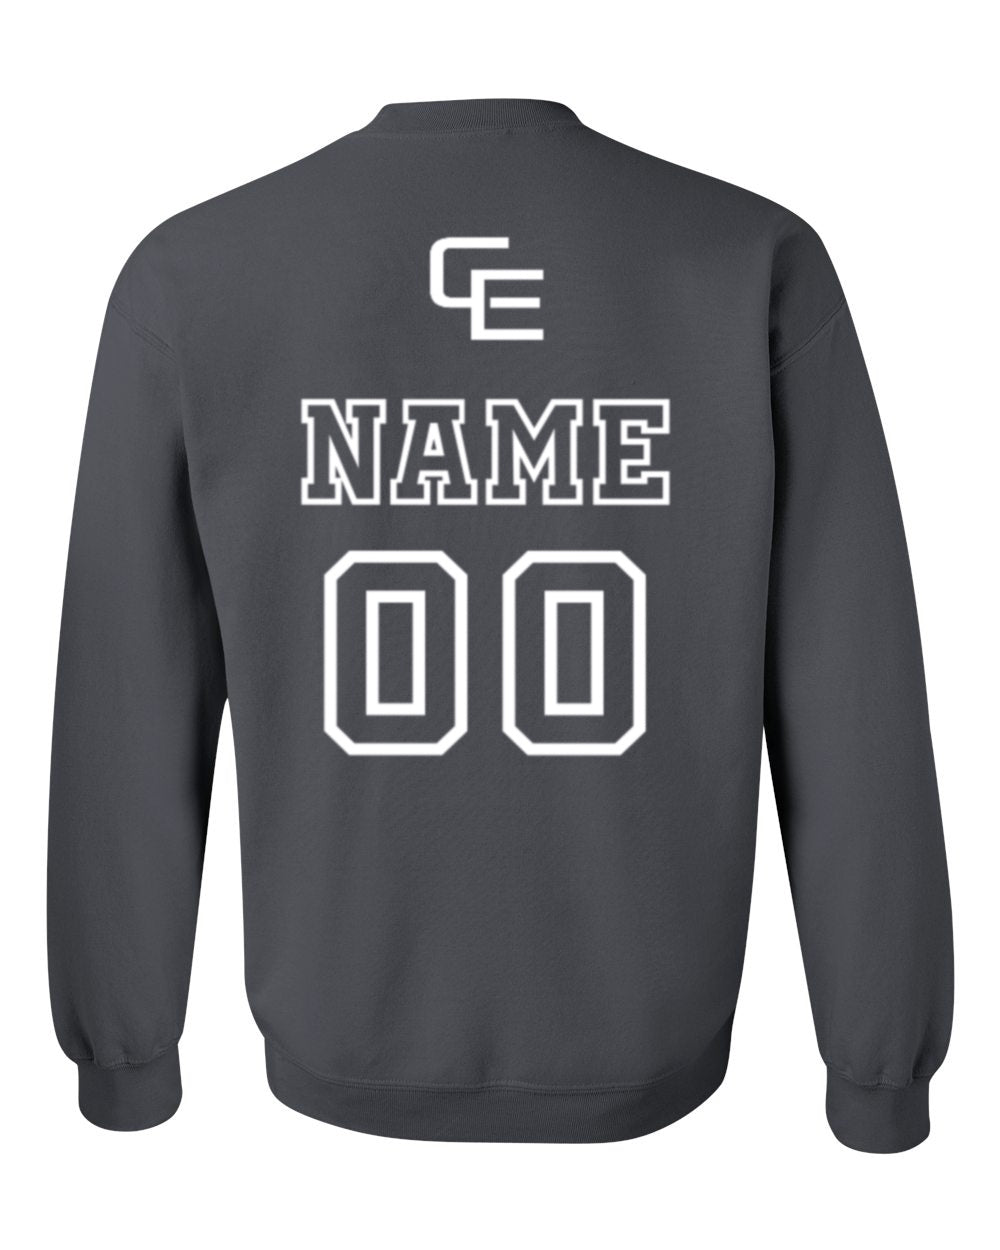 The Bases Loaded Crewneck